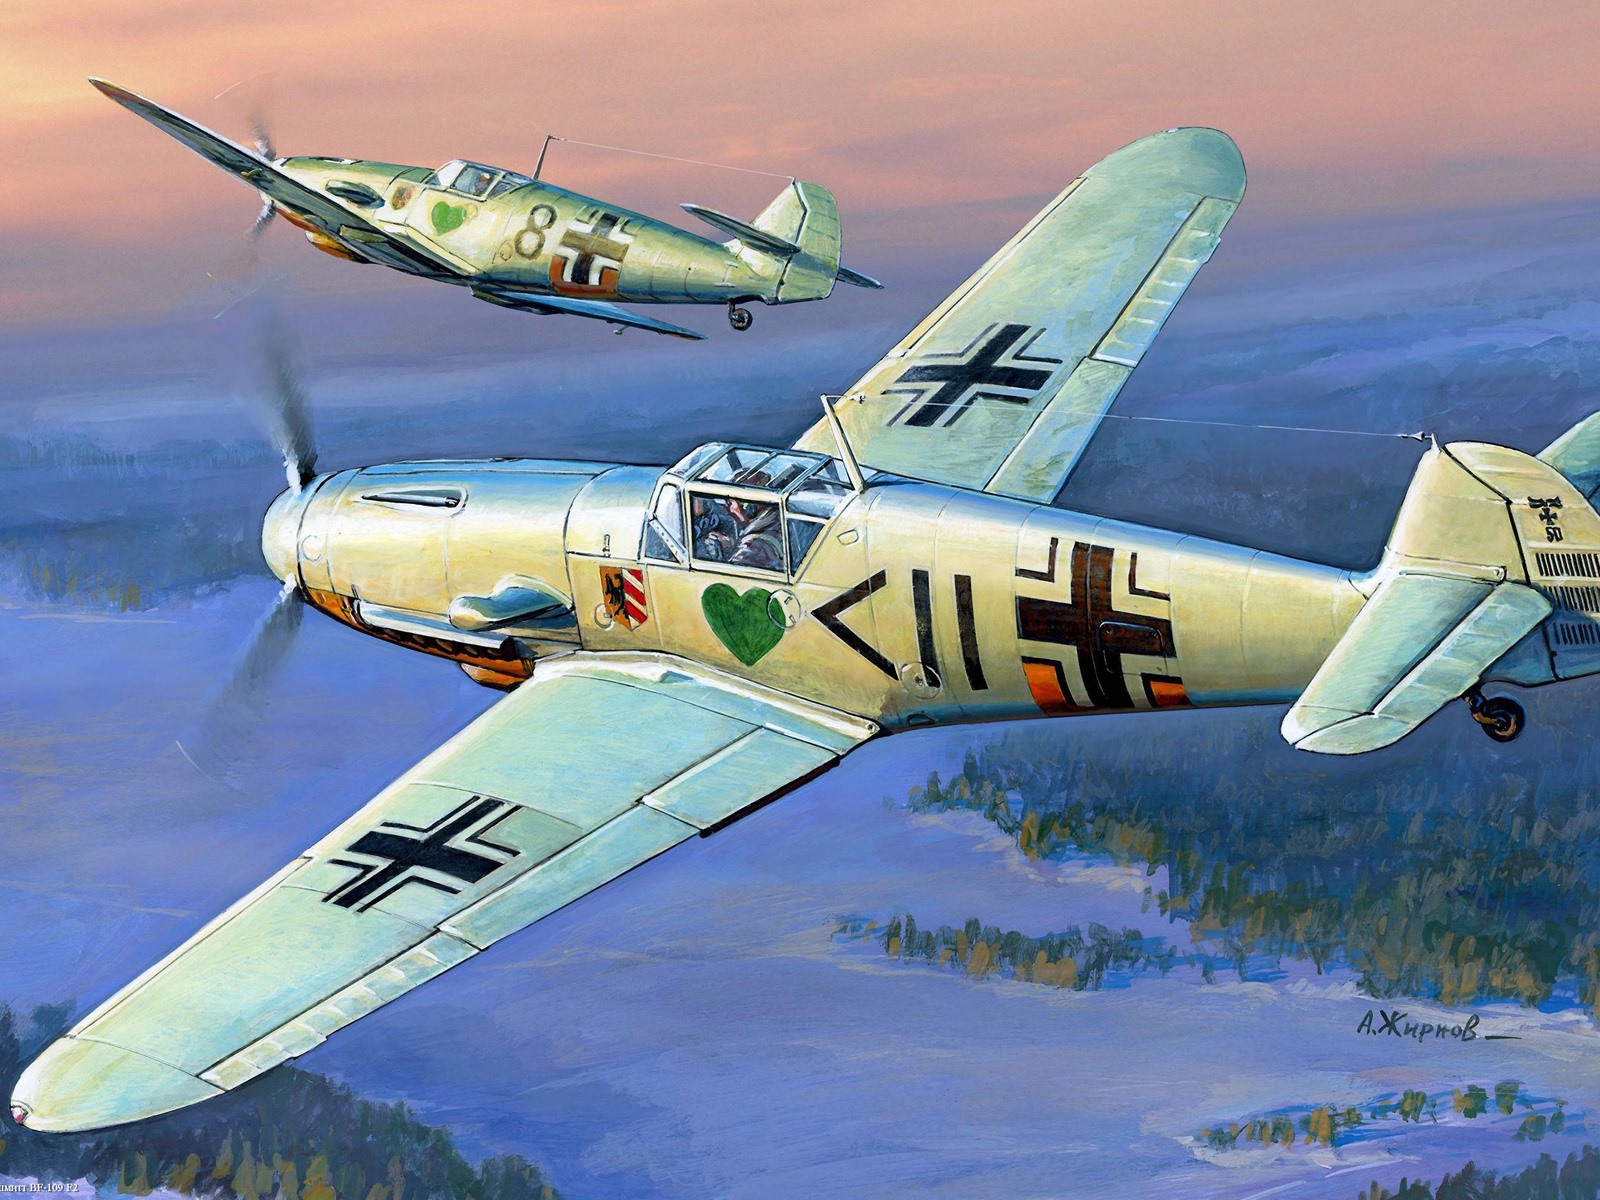 Military aircraft flight exquisite painting wallpapers #12 - 1600x1200